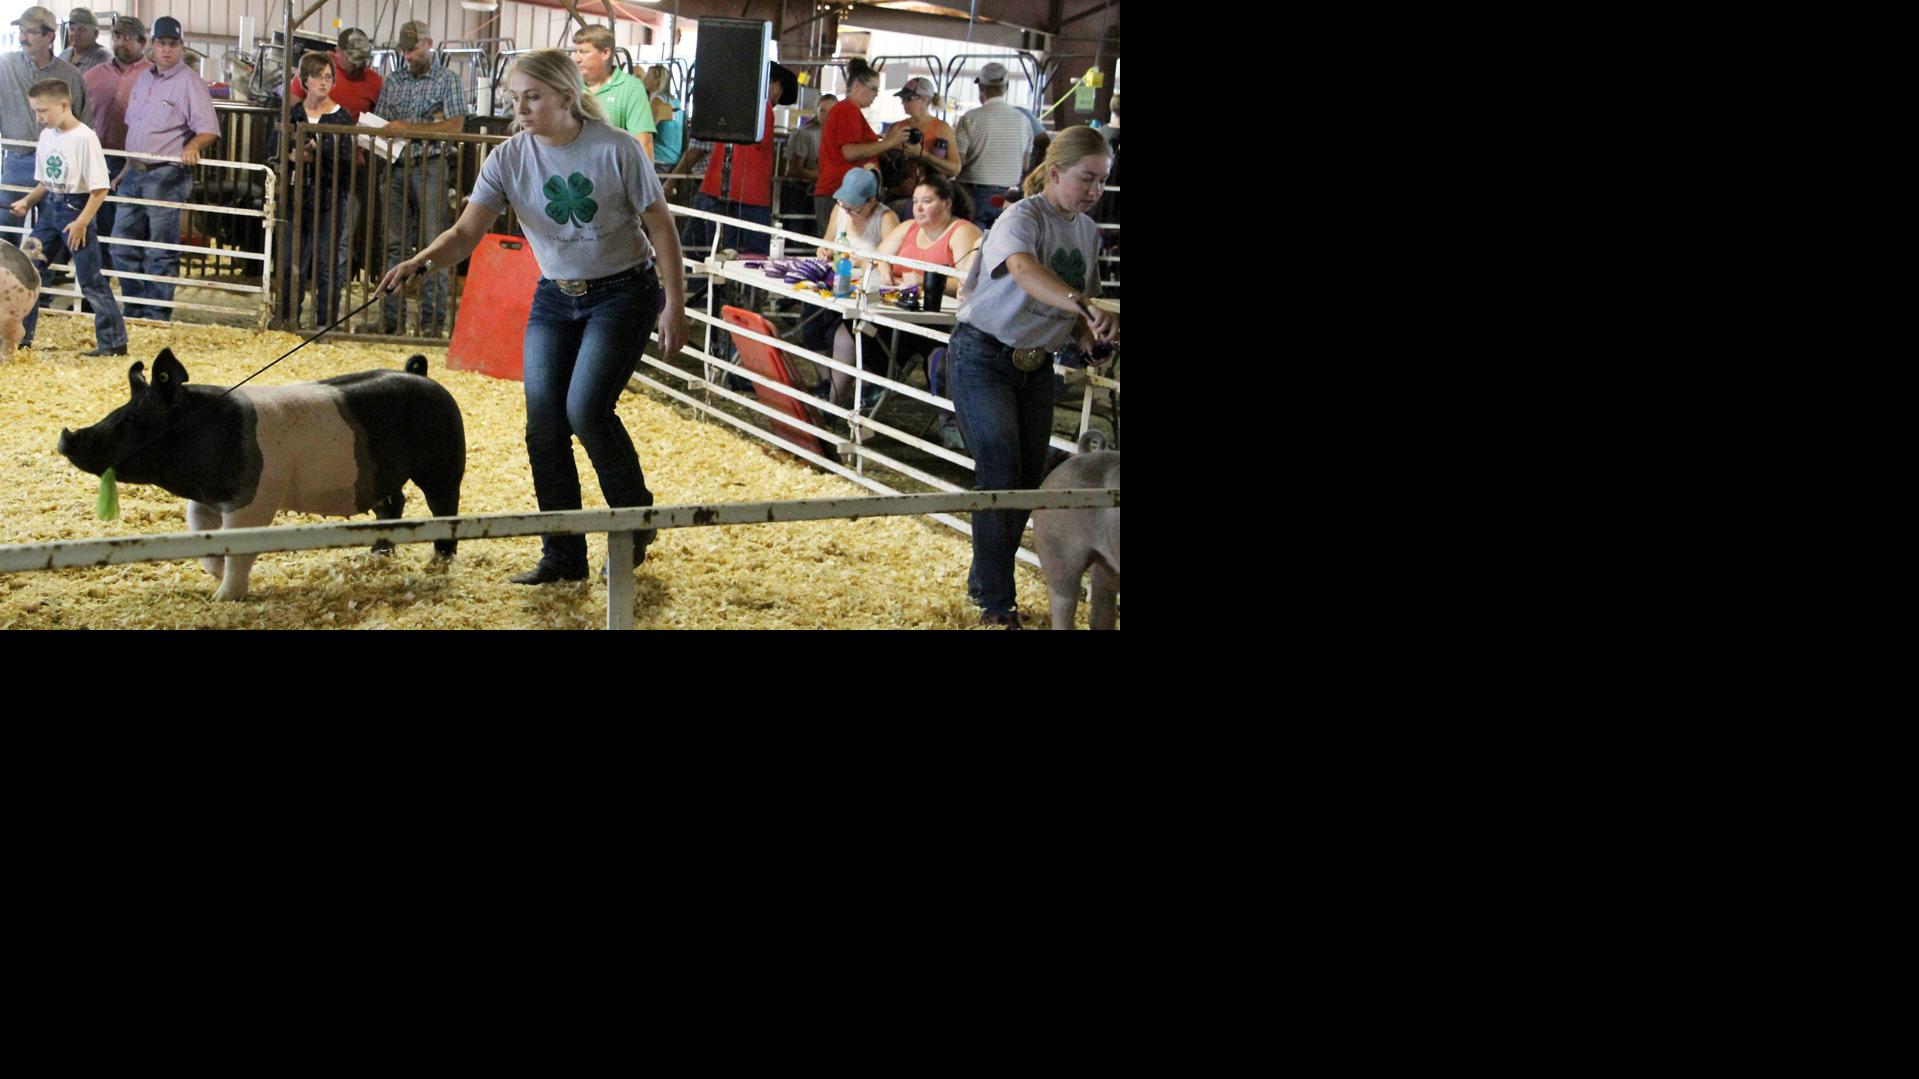 Lincoln County Fair to proceed, for now Local News